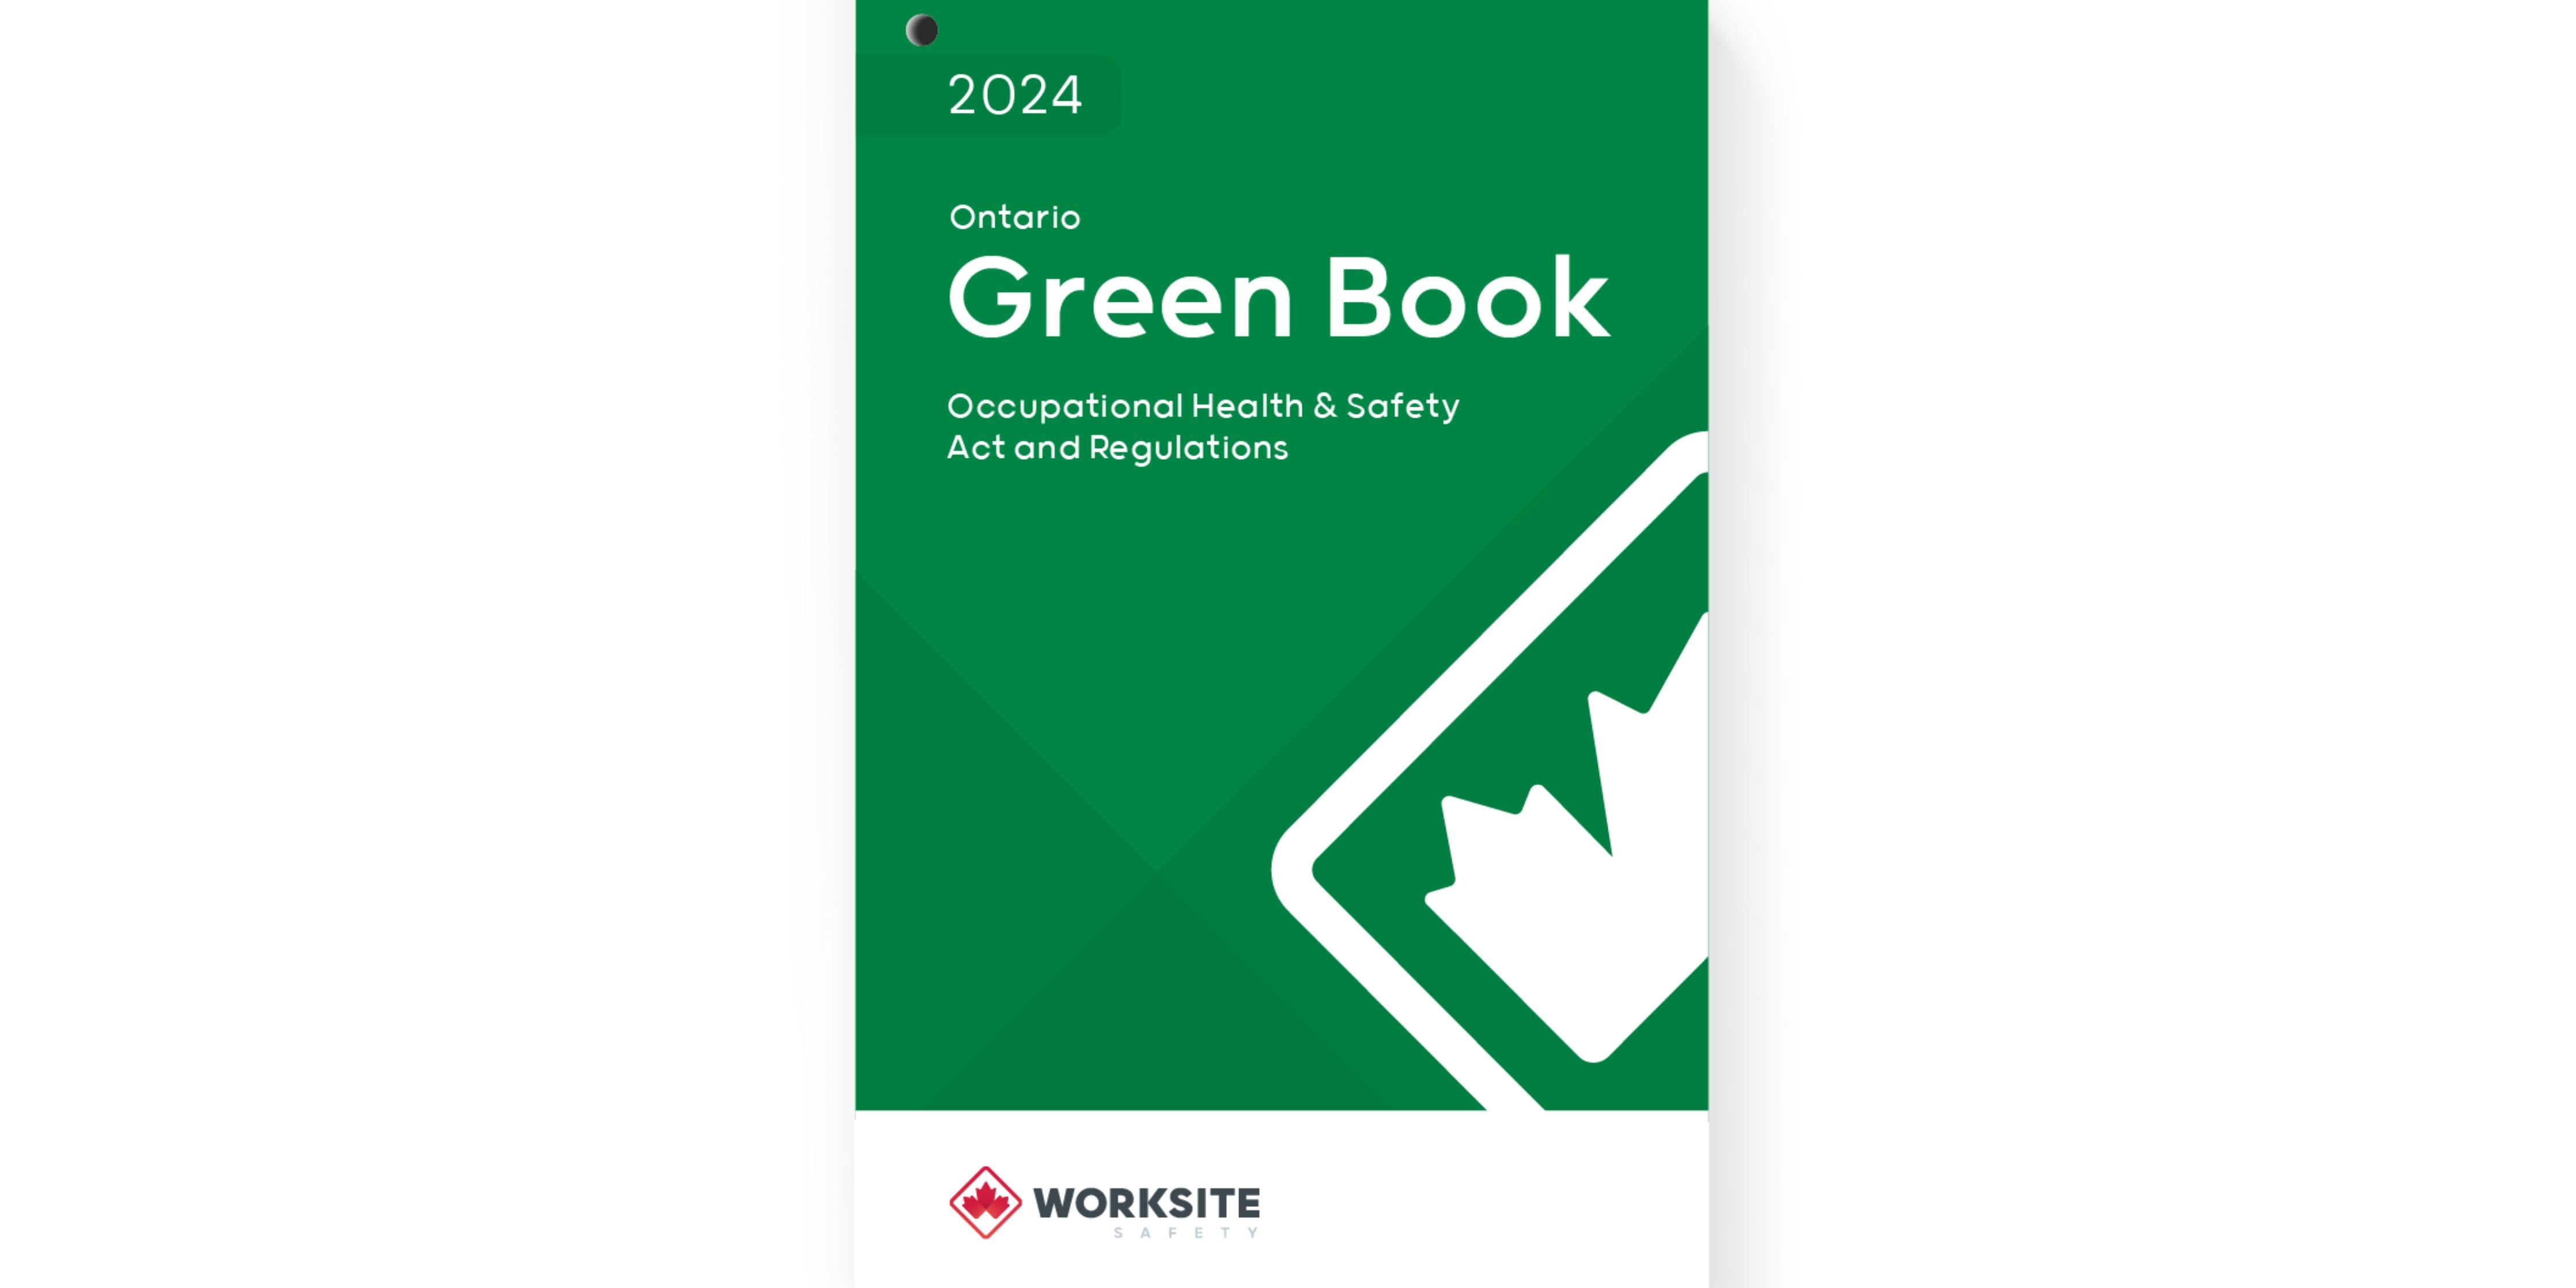 2024 Green Book Occupational Health & Safety Act and Regulations